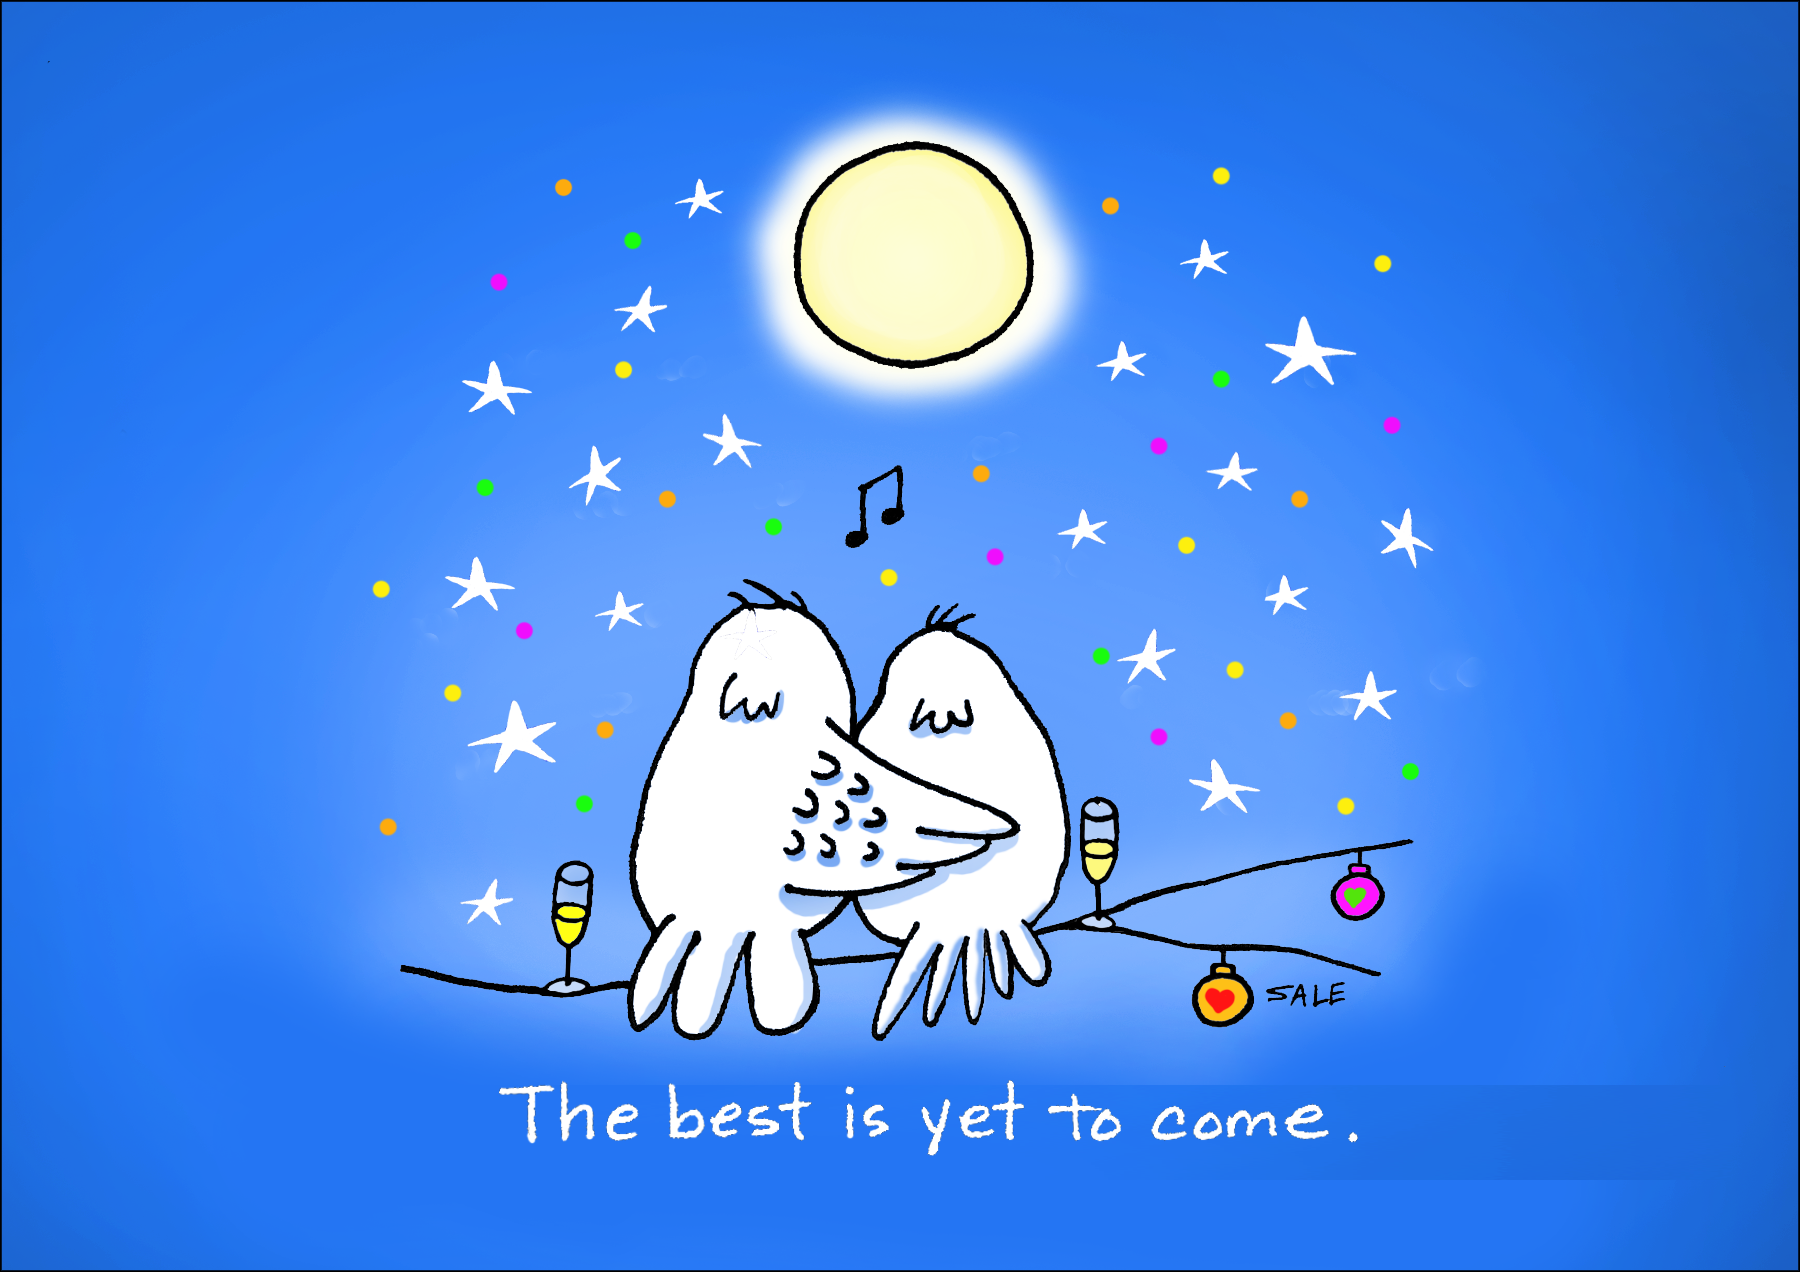 the best is yet to come love anniversary, valentines day, new years greeting card